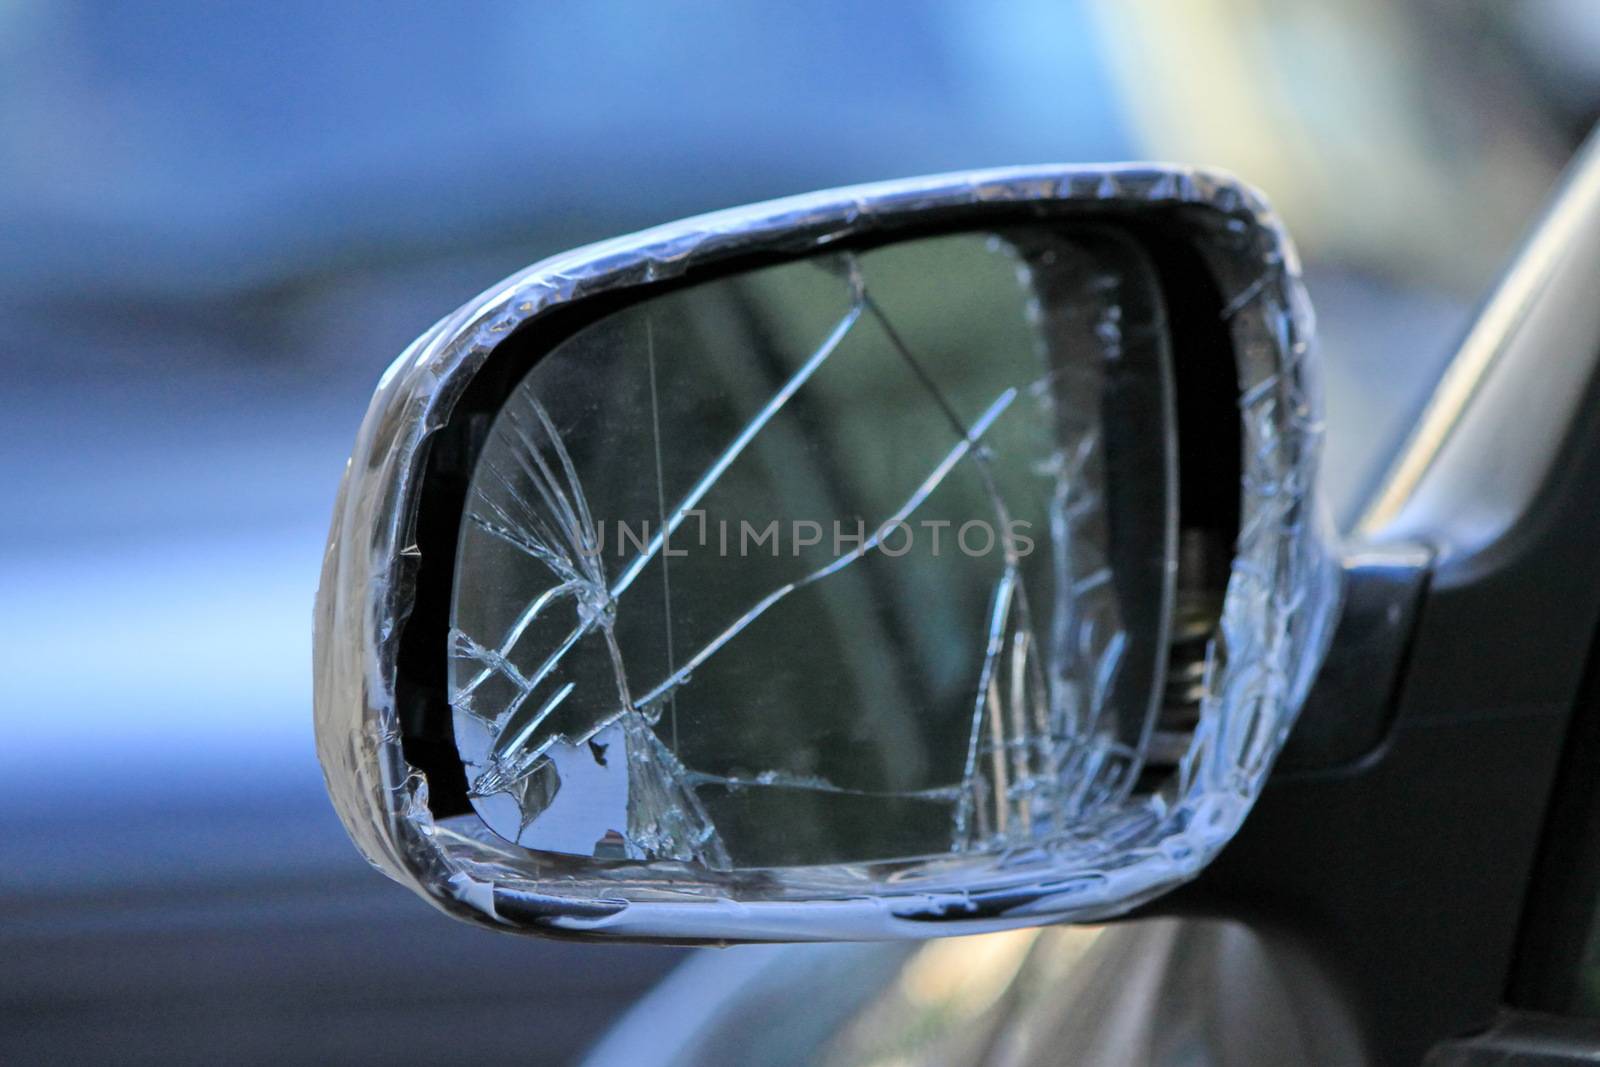 Damaged rearview mirror on a car by Elenaphotos21